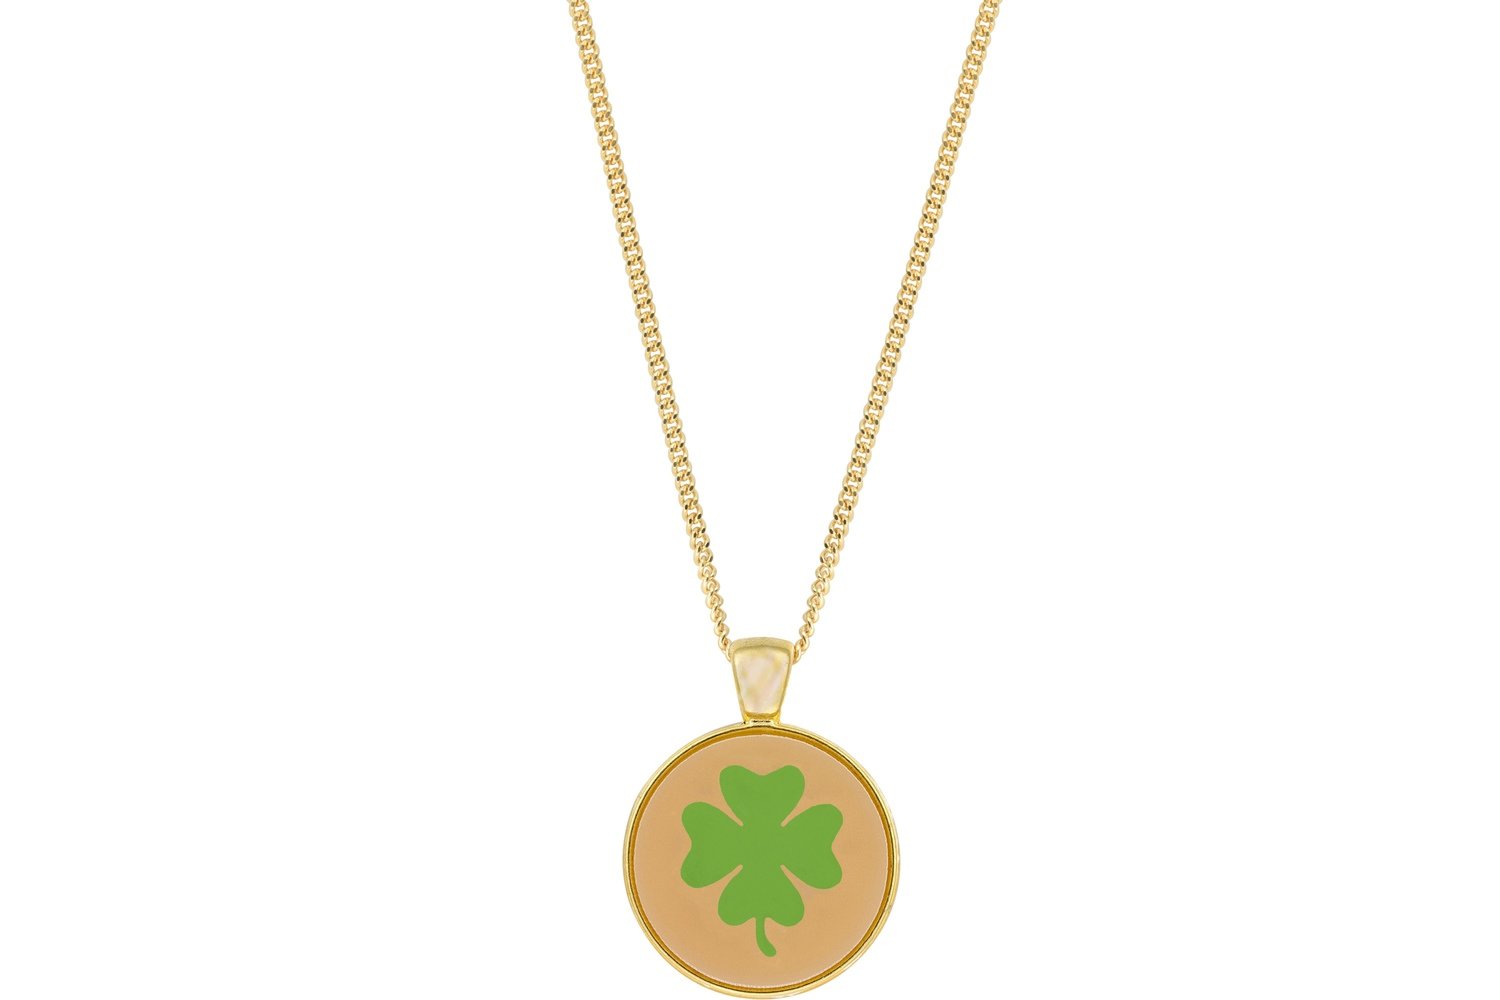 Clover Pendant Intricate Style on Chain Necklace